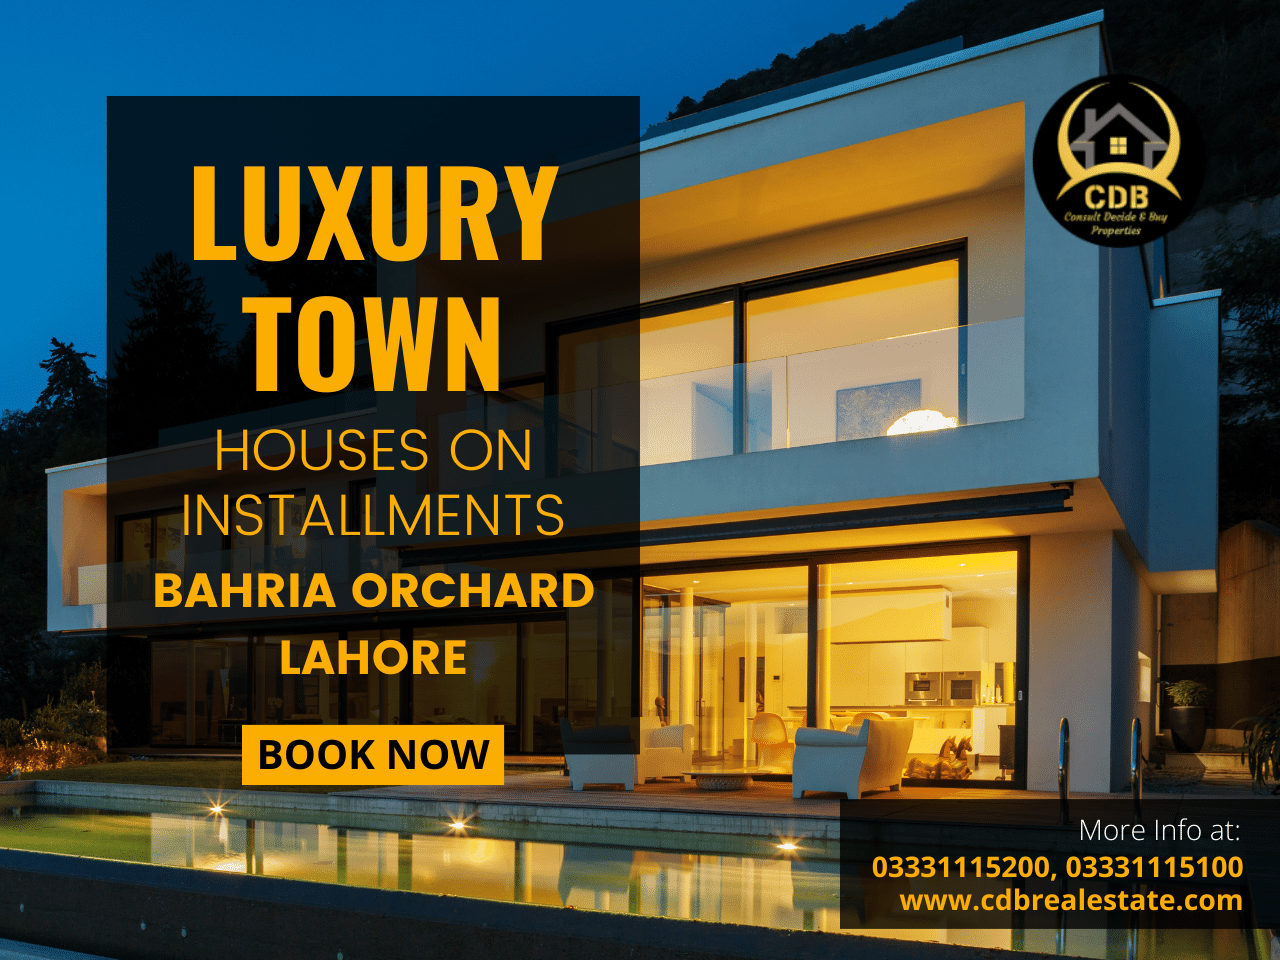 Luxury Town Houses Bahria Orchard